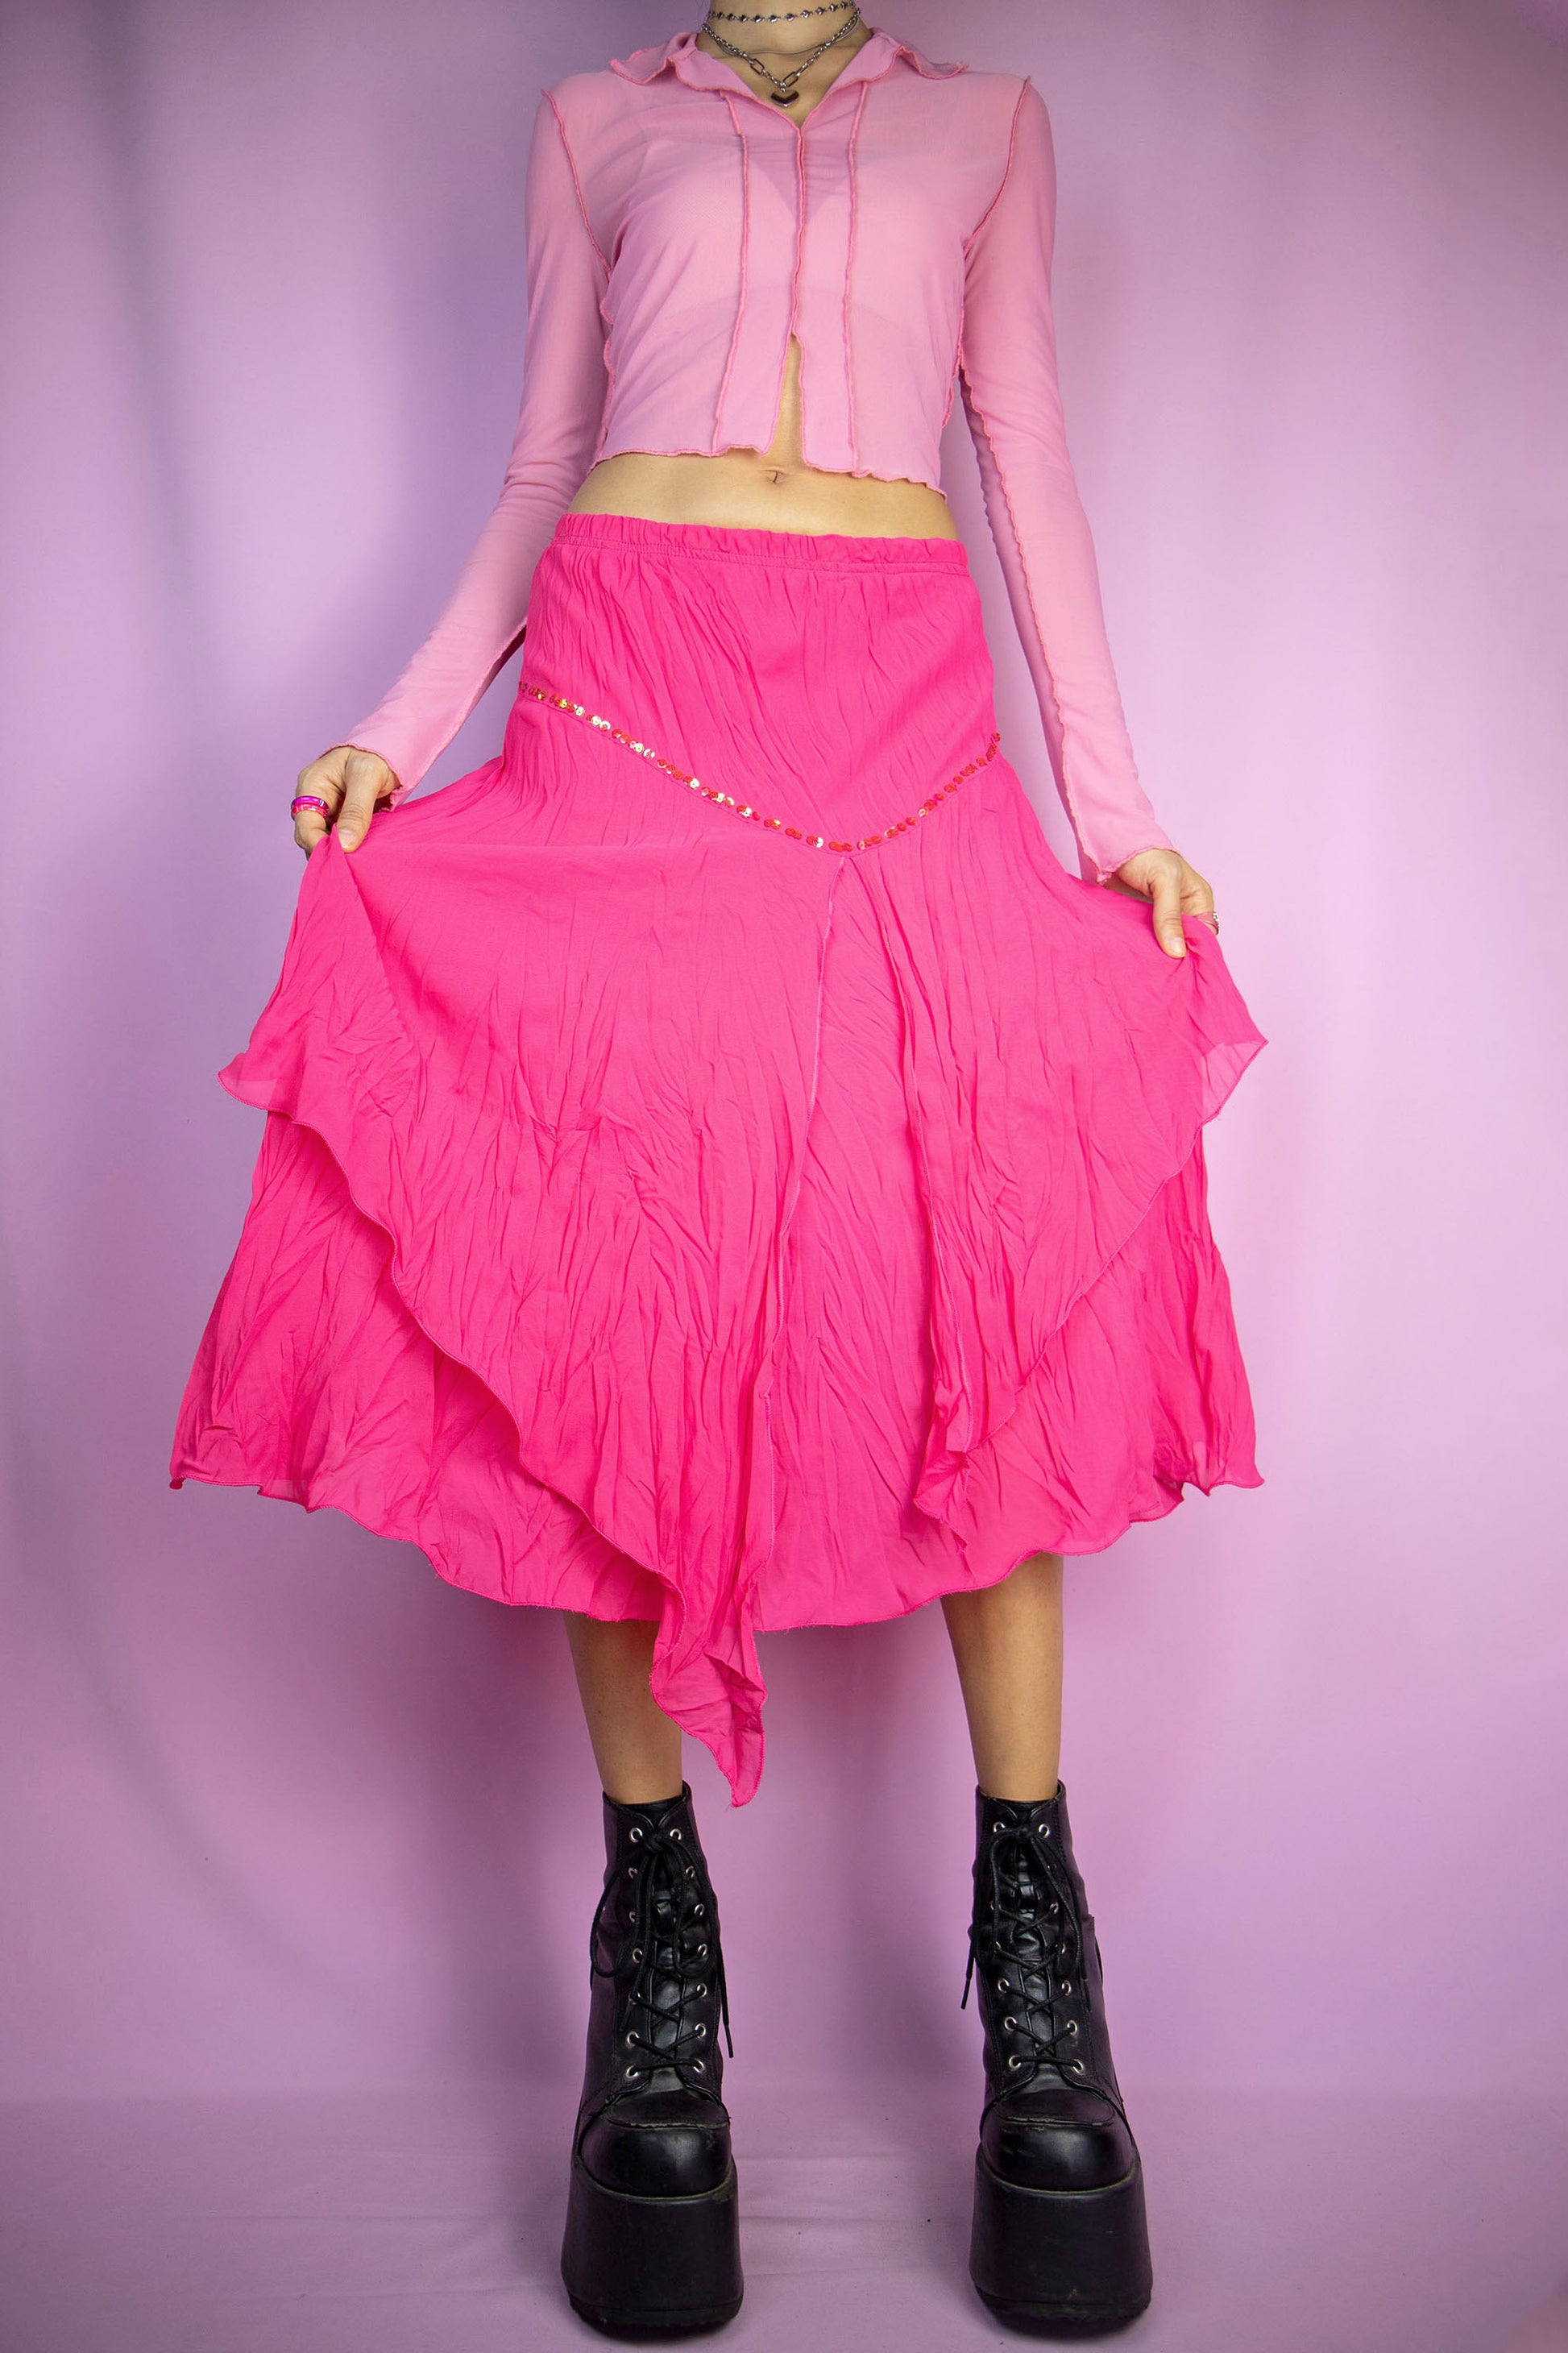 The Pink Asymmetric Midi Skirt is a vintage hot pink fuchsia layered skirt with an asymmetric pointed hem, adorned with sequin details and featuring an elasticated waist. Romantic boho fairy grunge 2000s evening party maxi skirt. Excellent vintage condition.